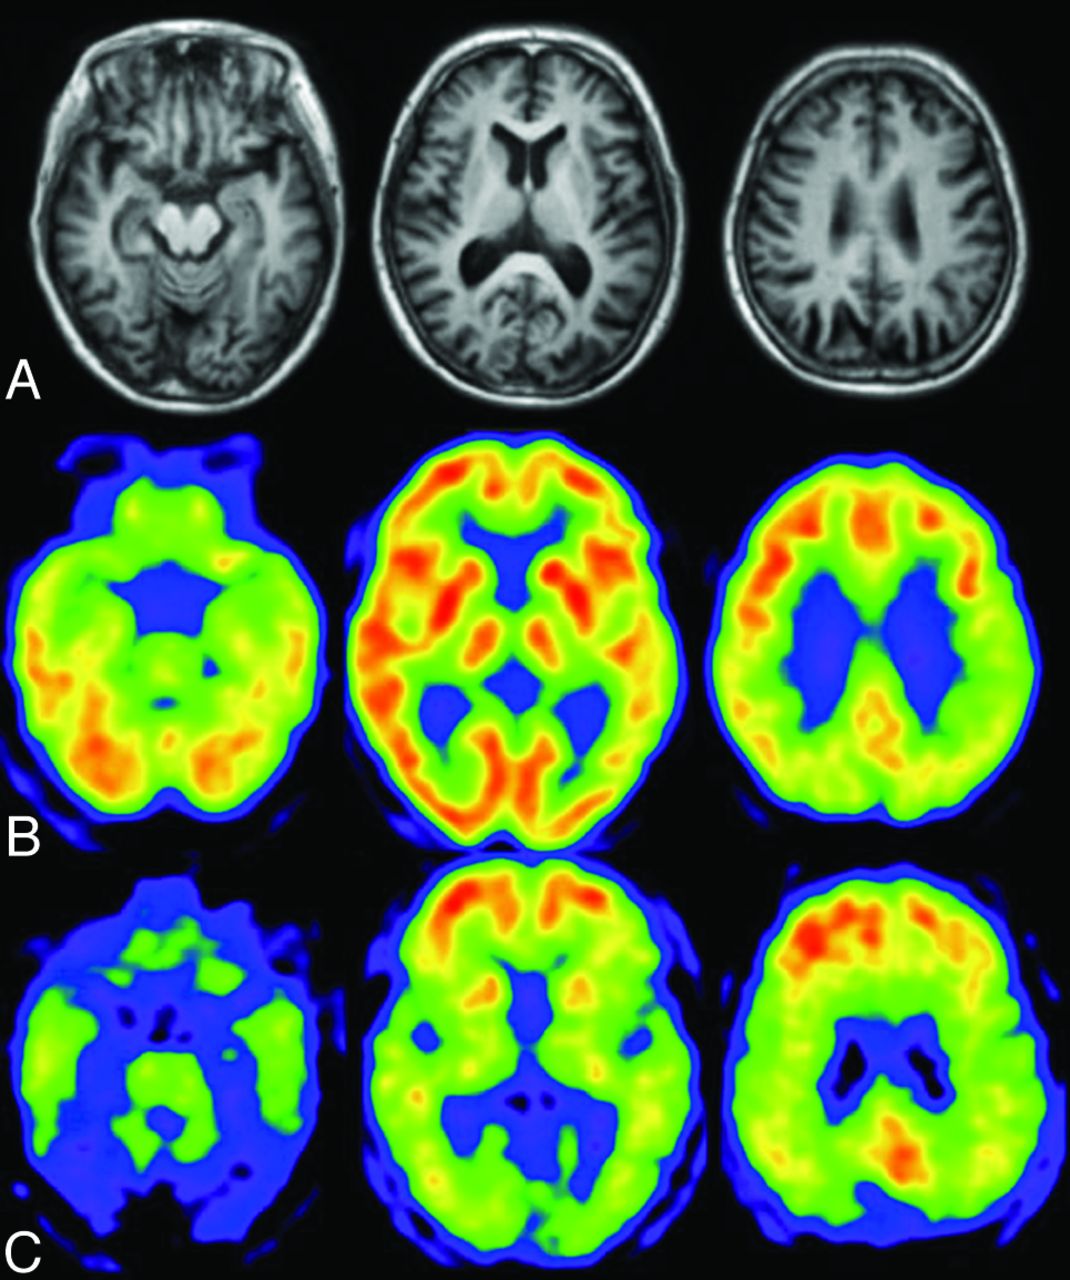 Approaches for Diagnosis of Dementia American Journal of Neuroradiology